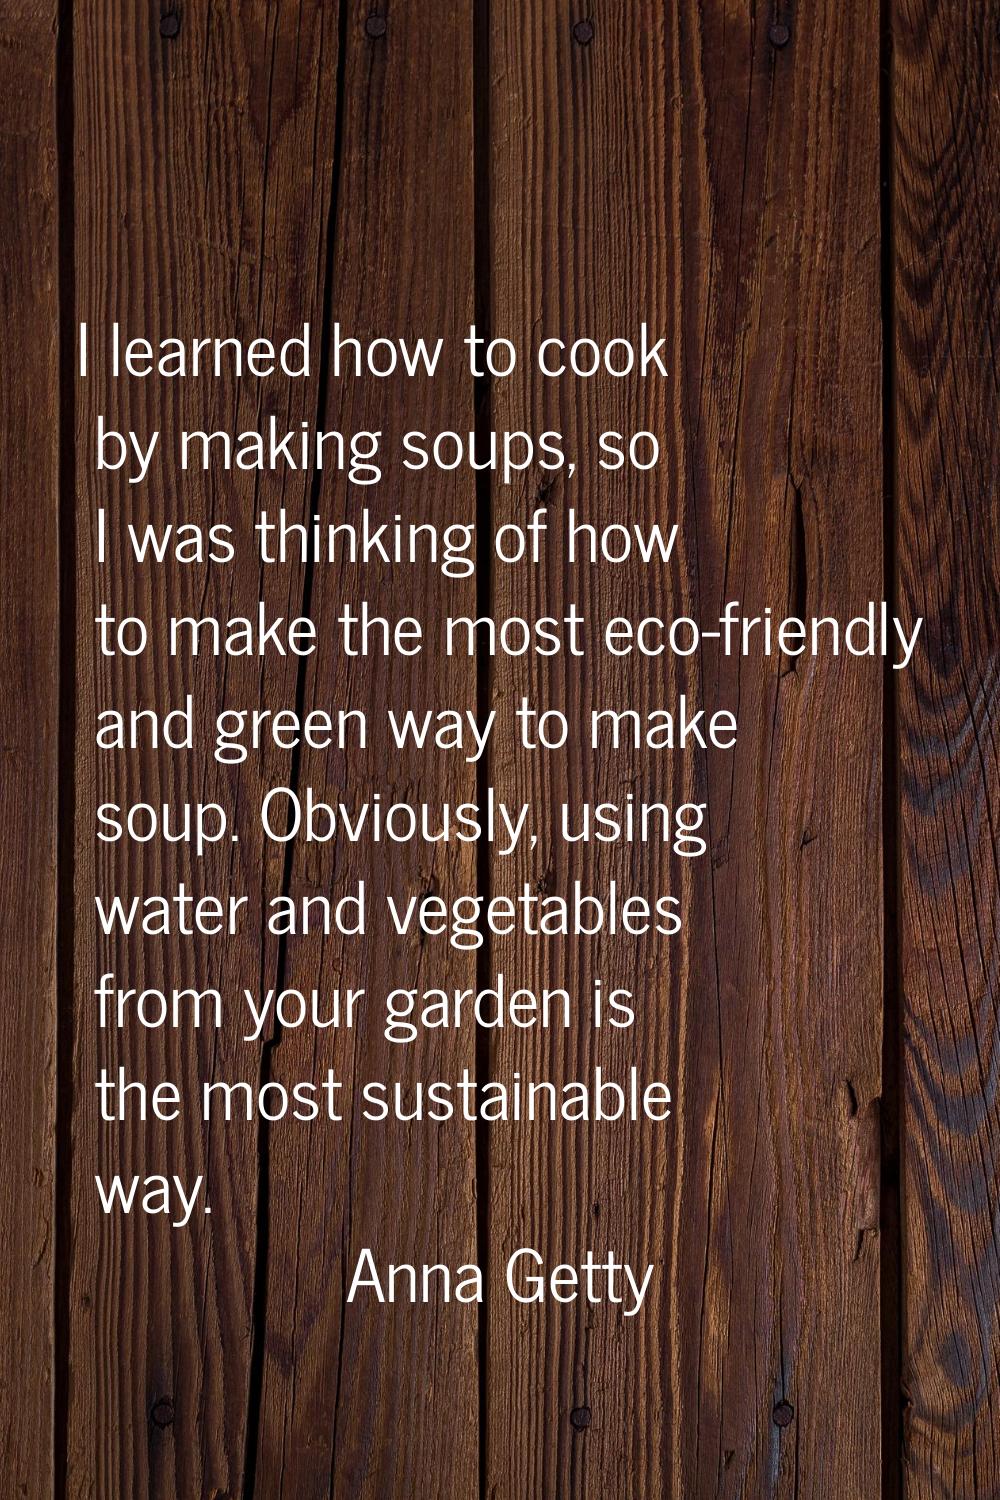 I learned how to cook by making soups, so I was thinking of how to make the most eco-friendly and g